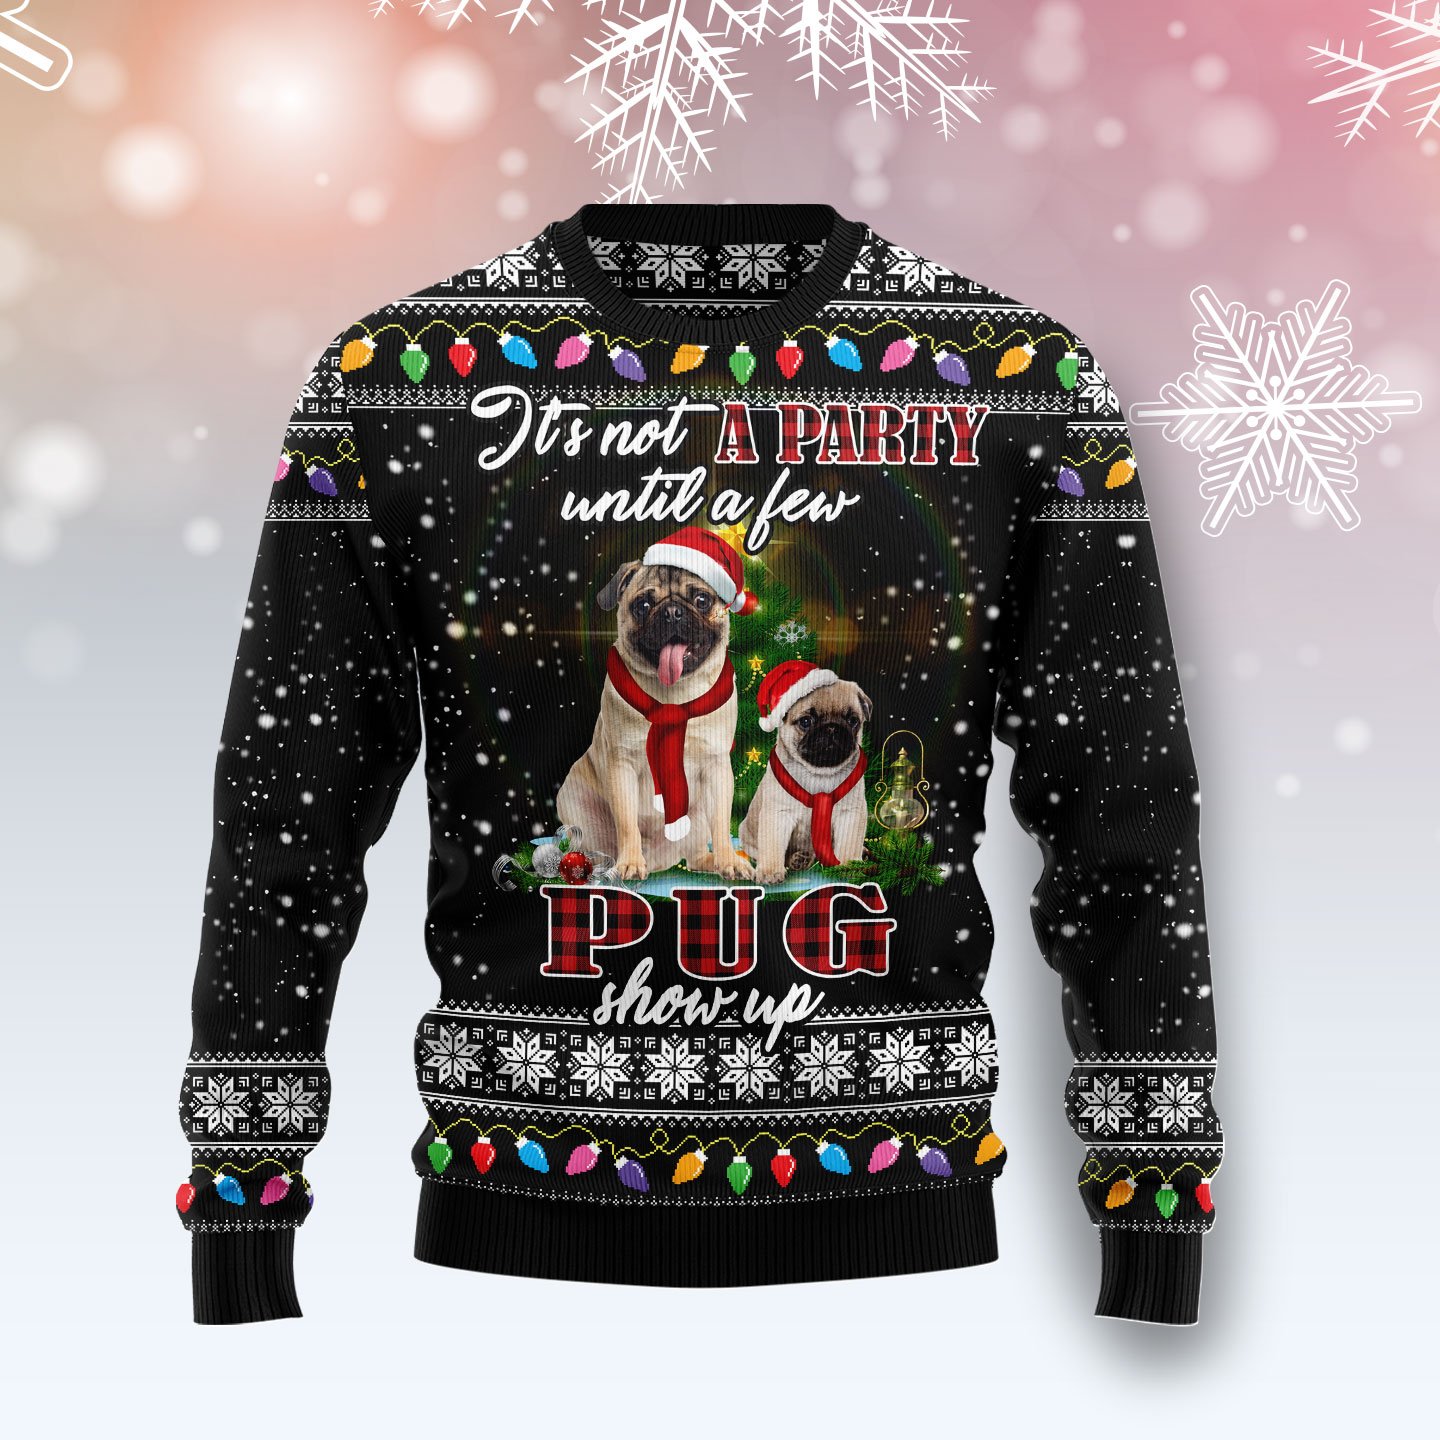 Pug Show Up D1111 Ugly Christmas Sweater